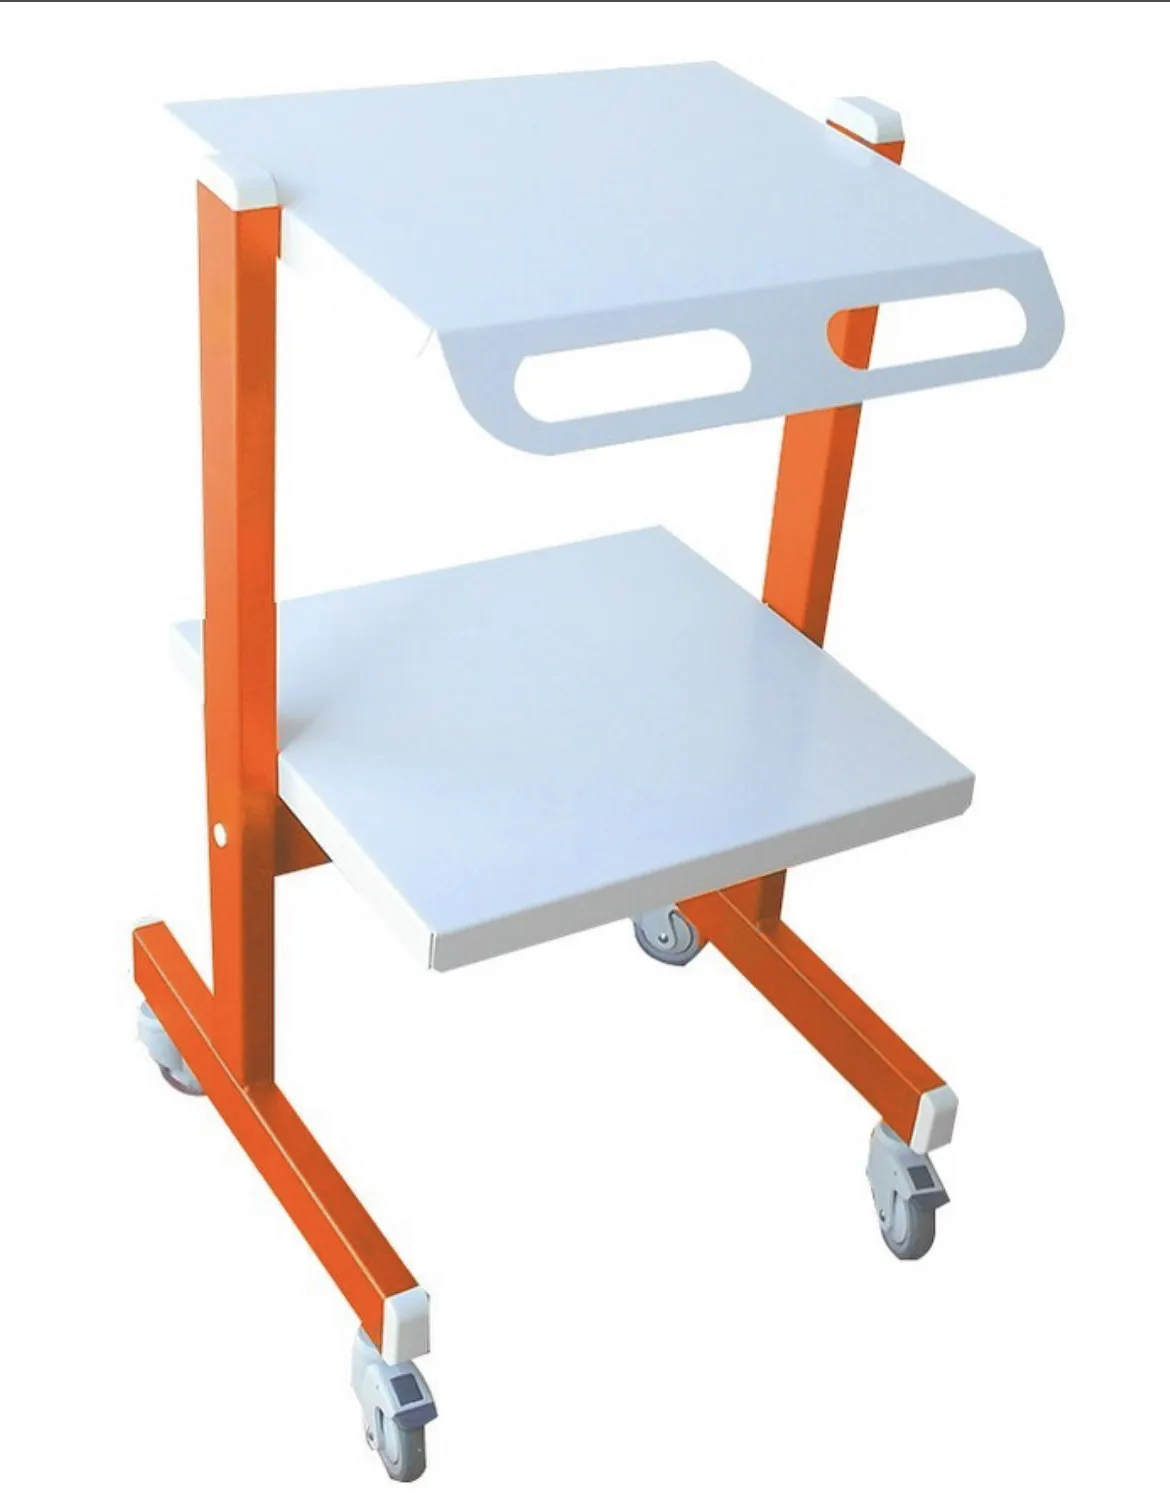 premium quality iron medical trolley made in italy ce mark  iso 9001 hospital furniture ecg oem for export (10000007263638)